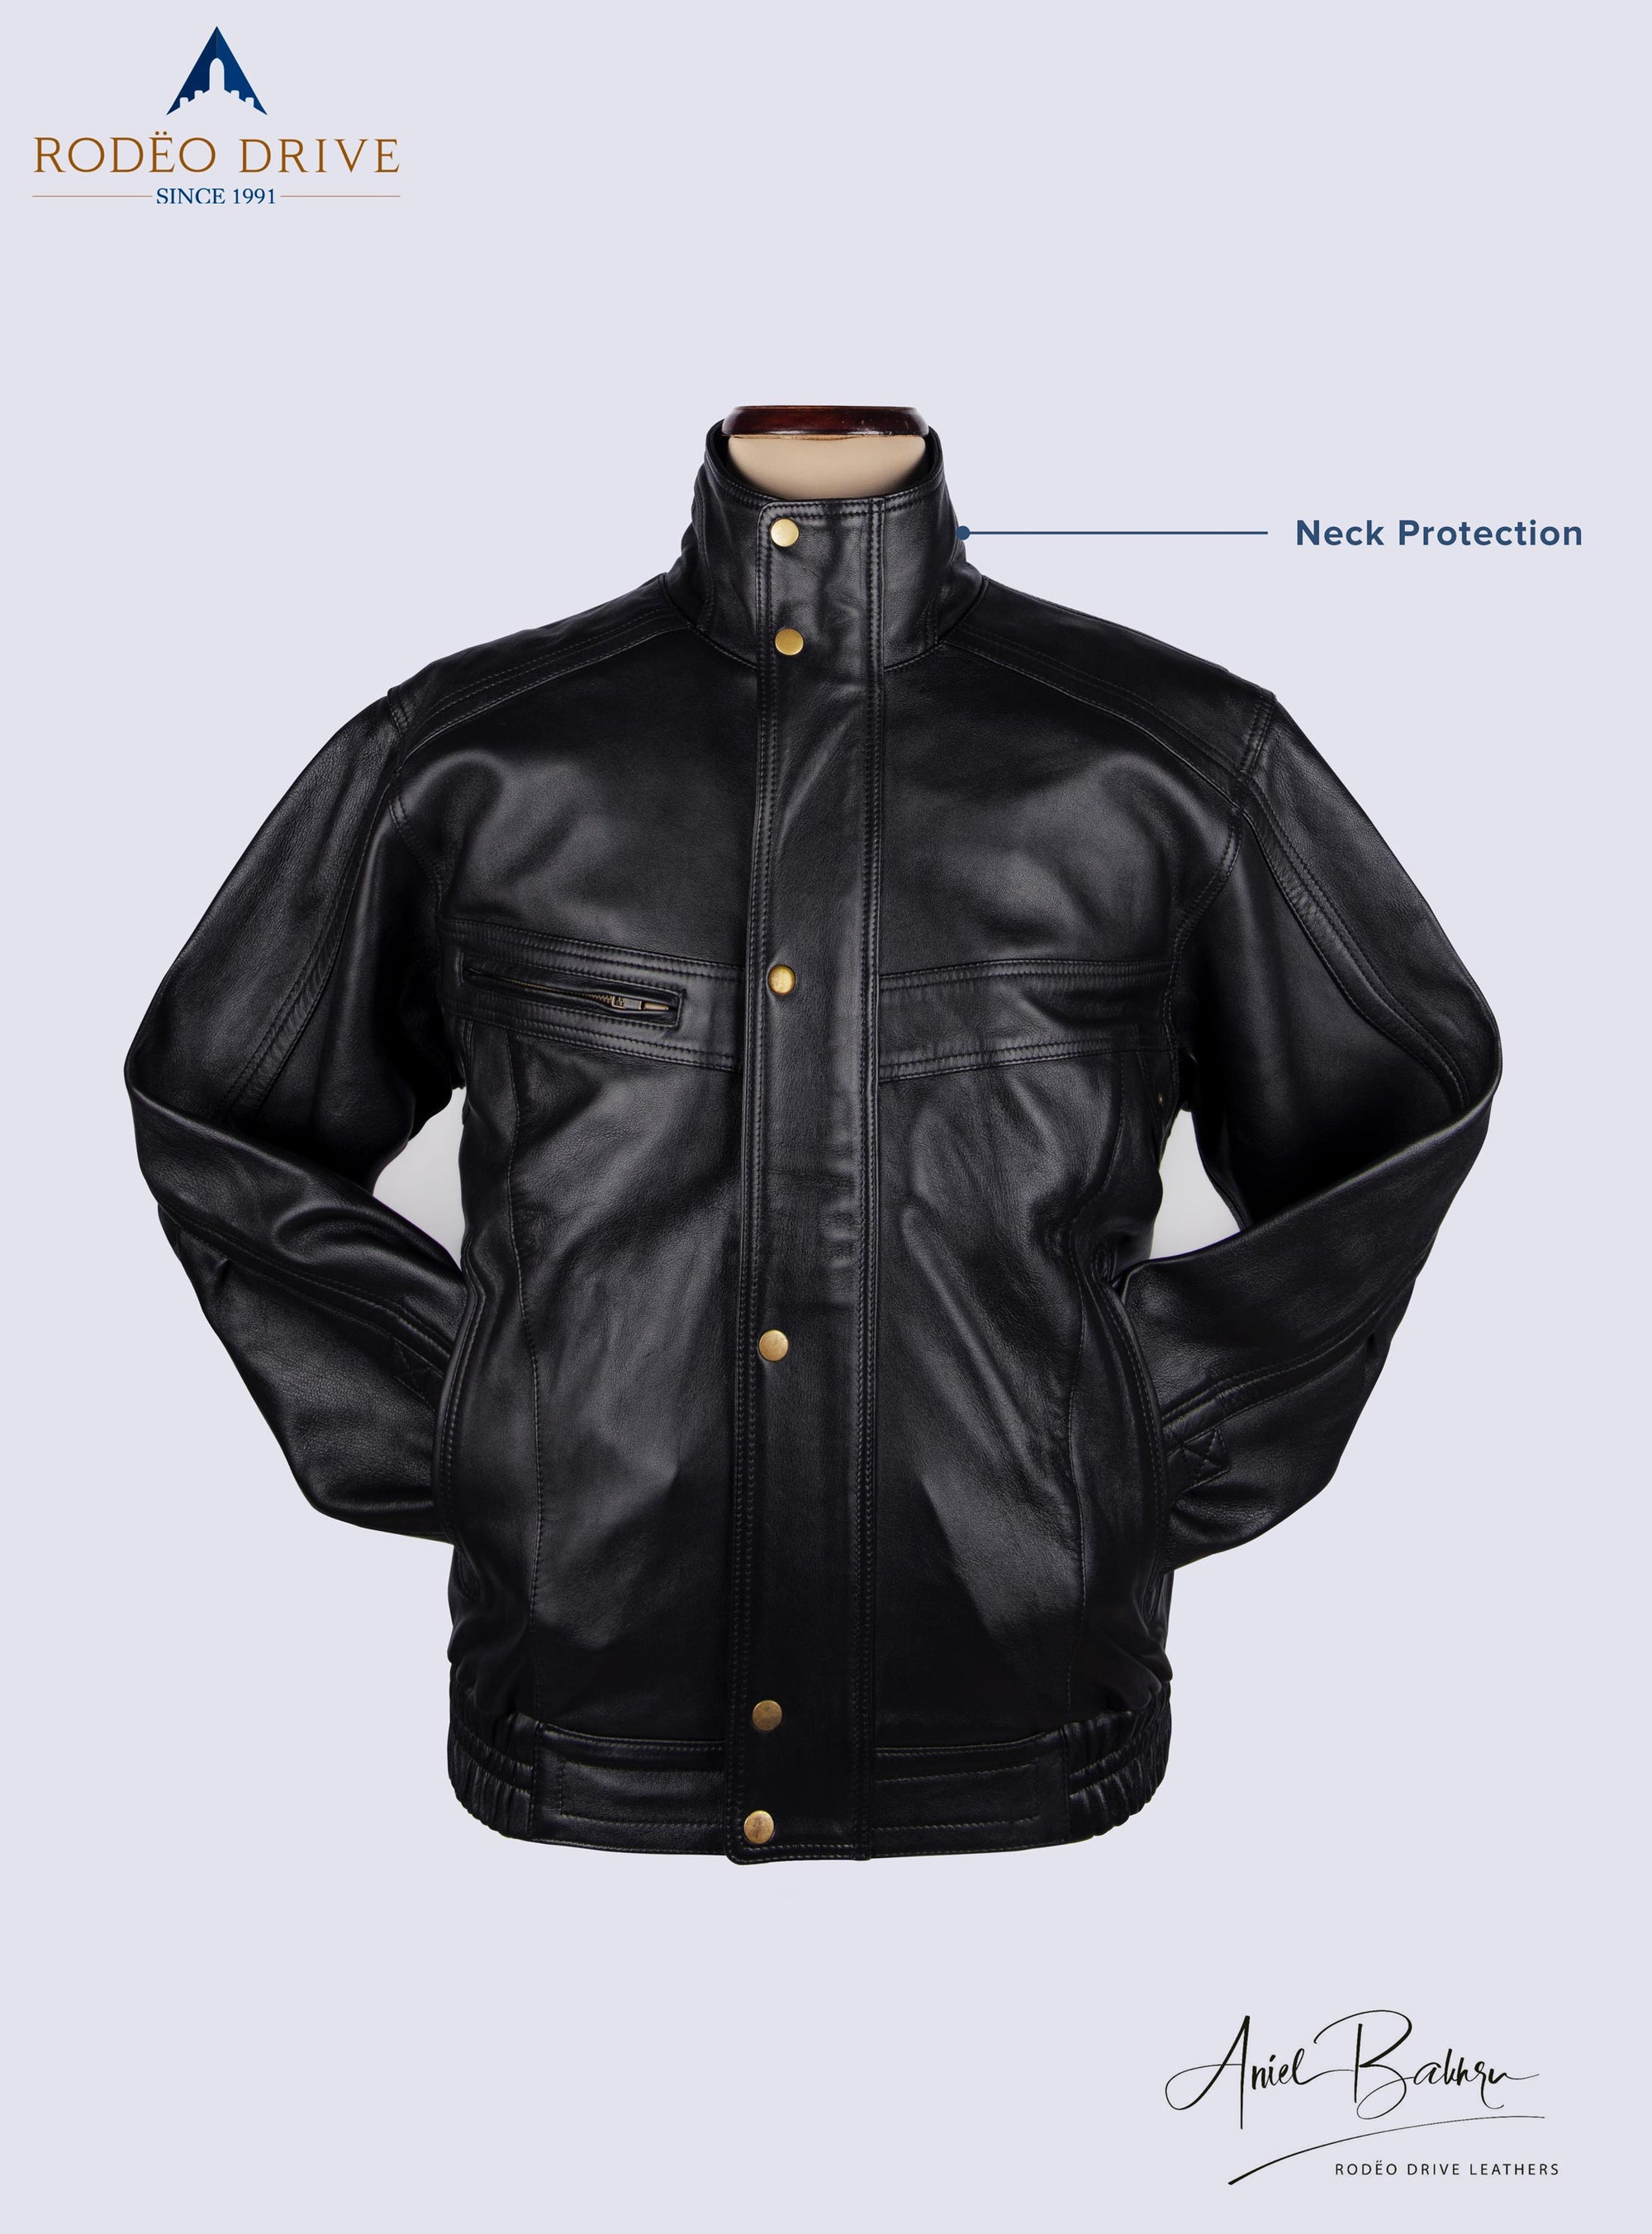 Attractive Neck protection of Bomber jacket displayed. Entire neck get wrapped with turtle neck there by providing total protection against cold.